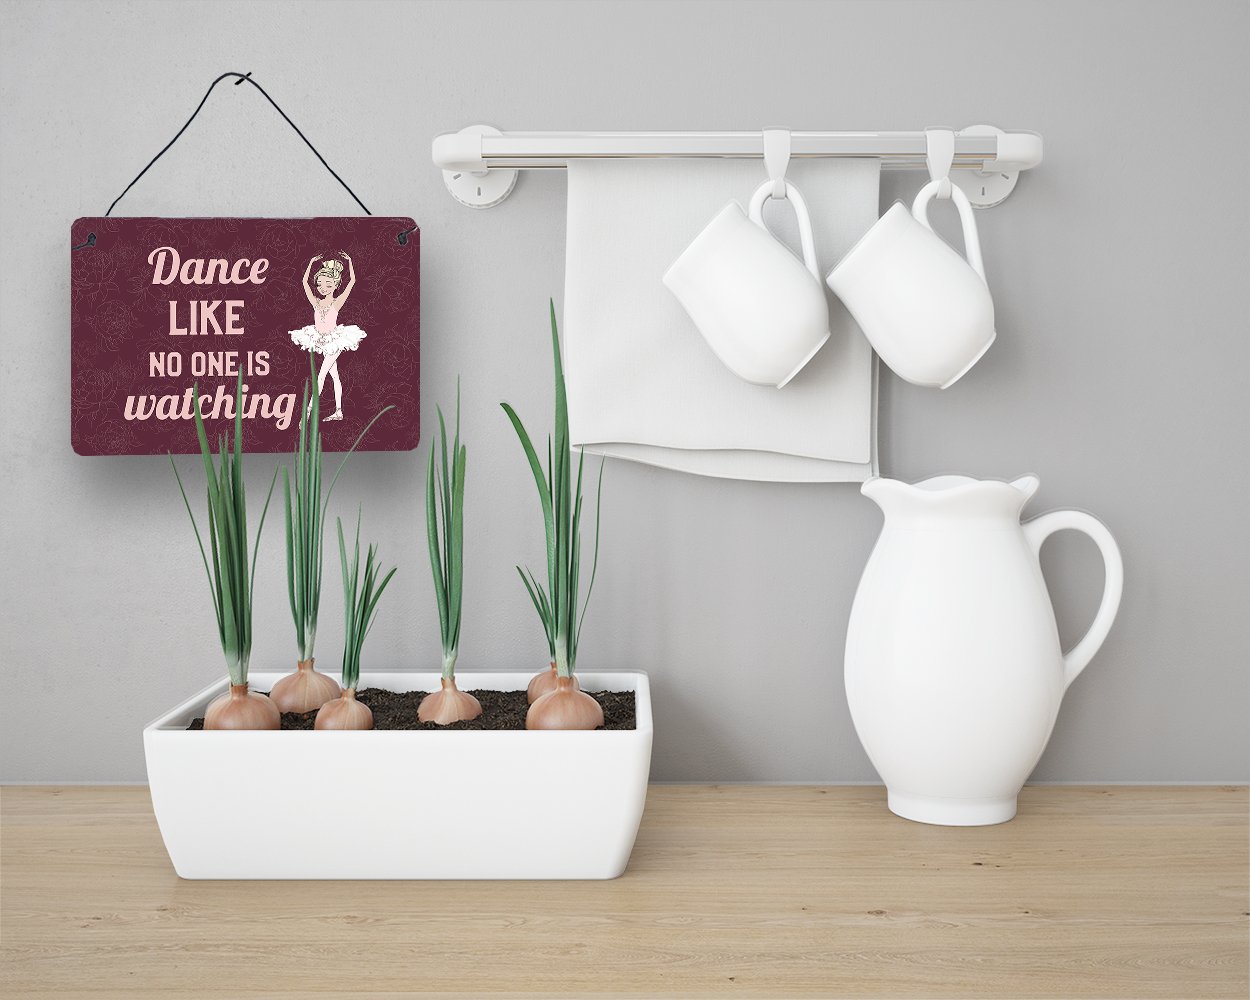 Dance like no one is watching Wall or Door Hanging Prints - the-store.com